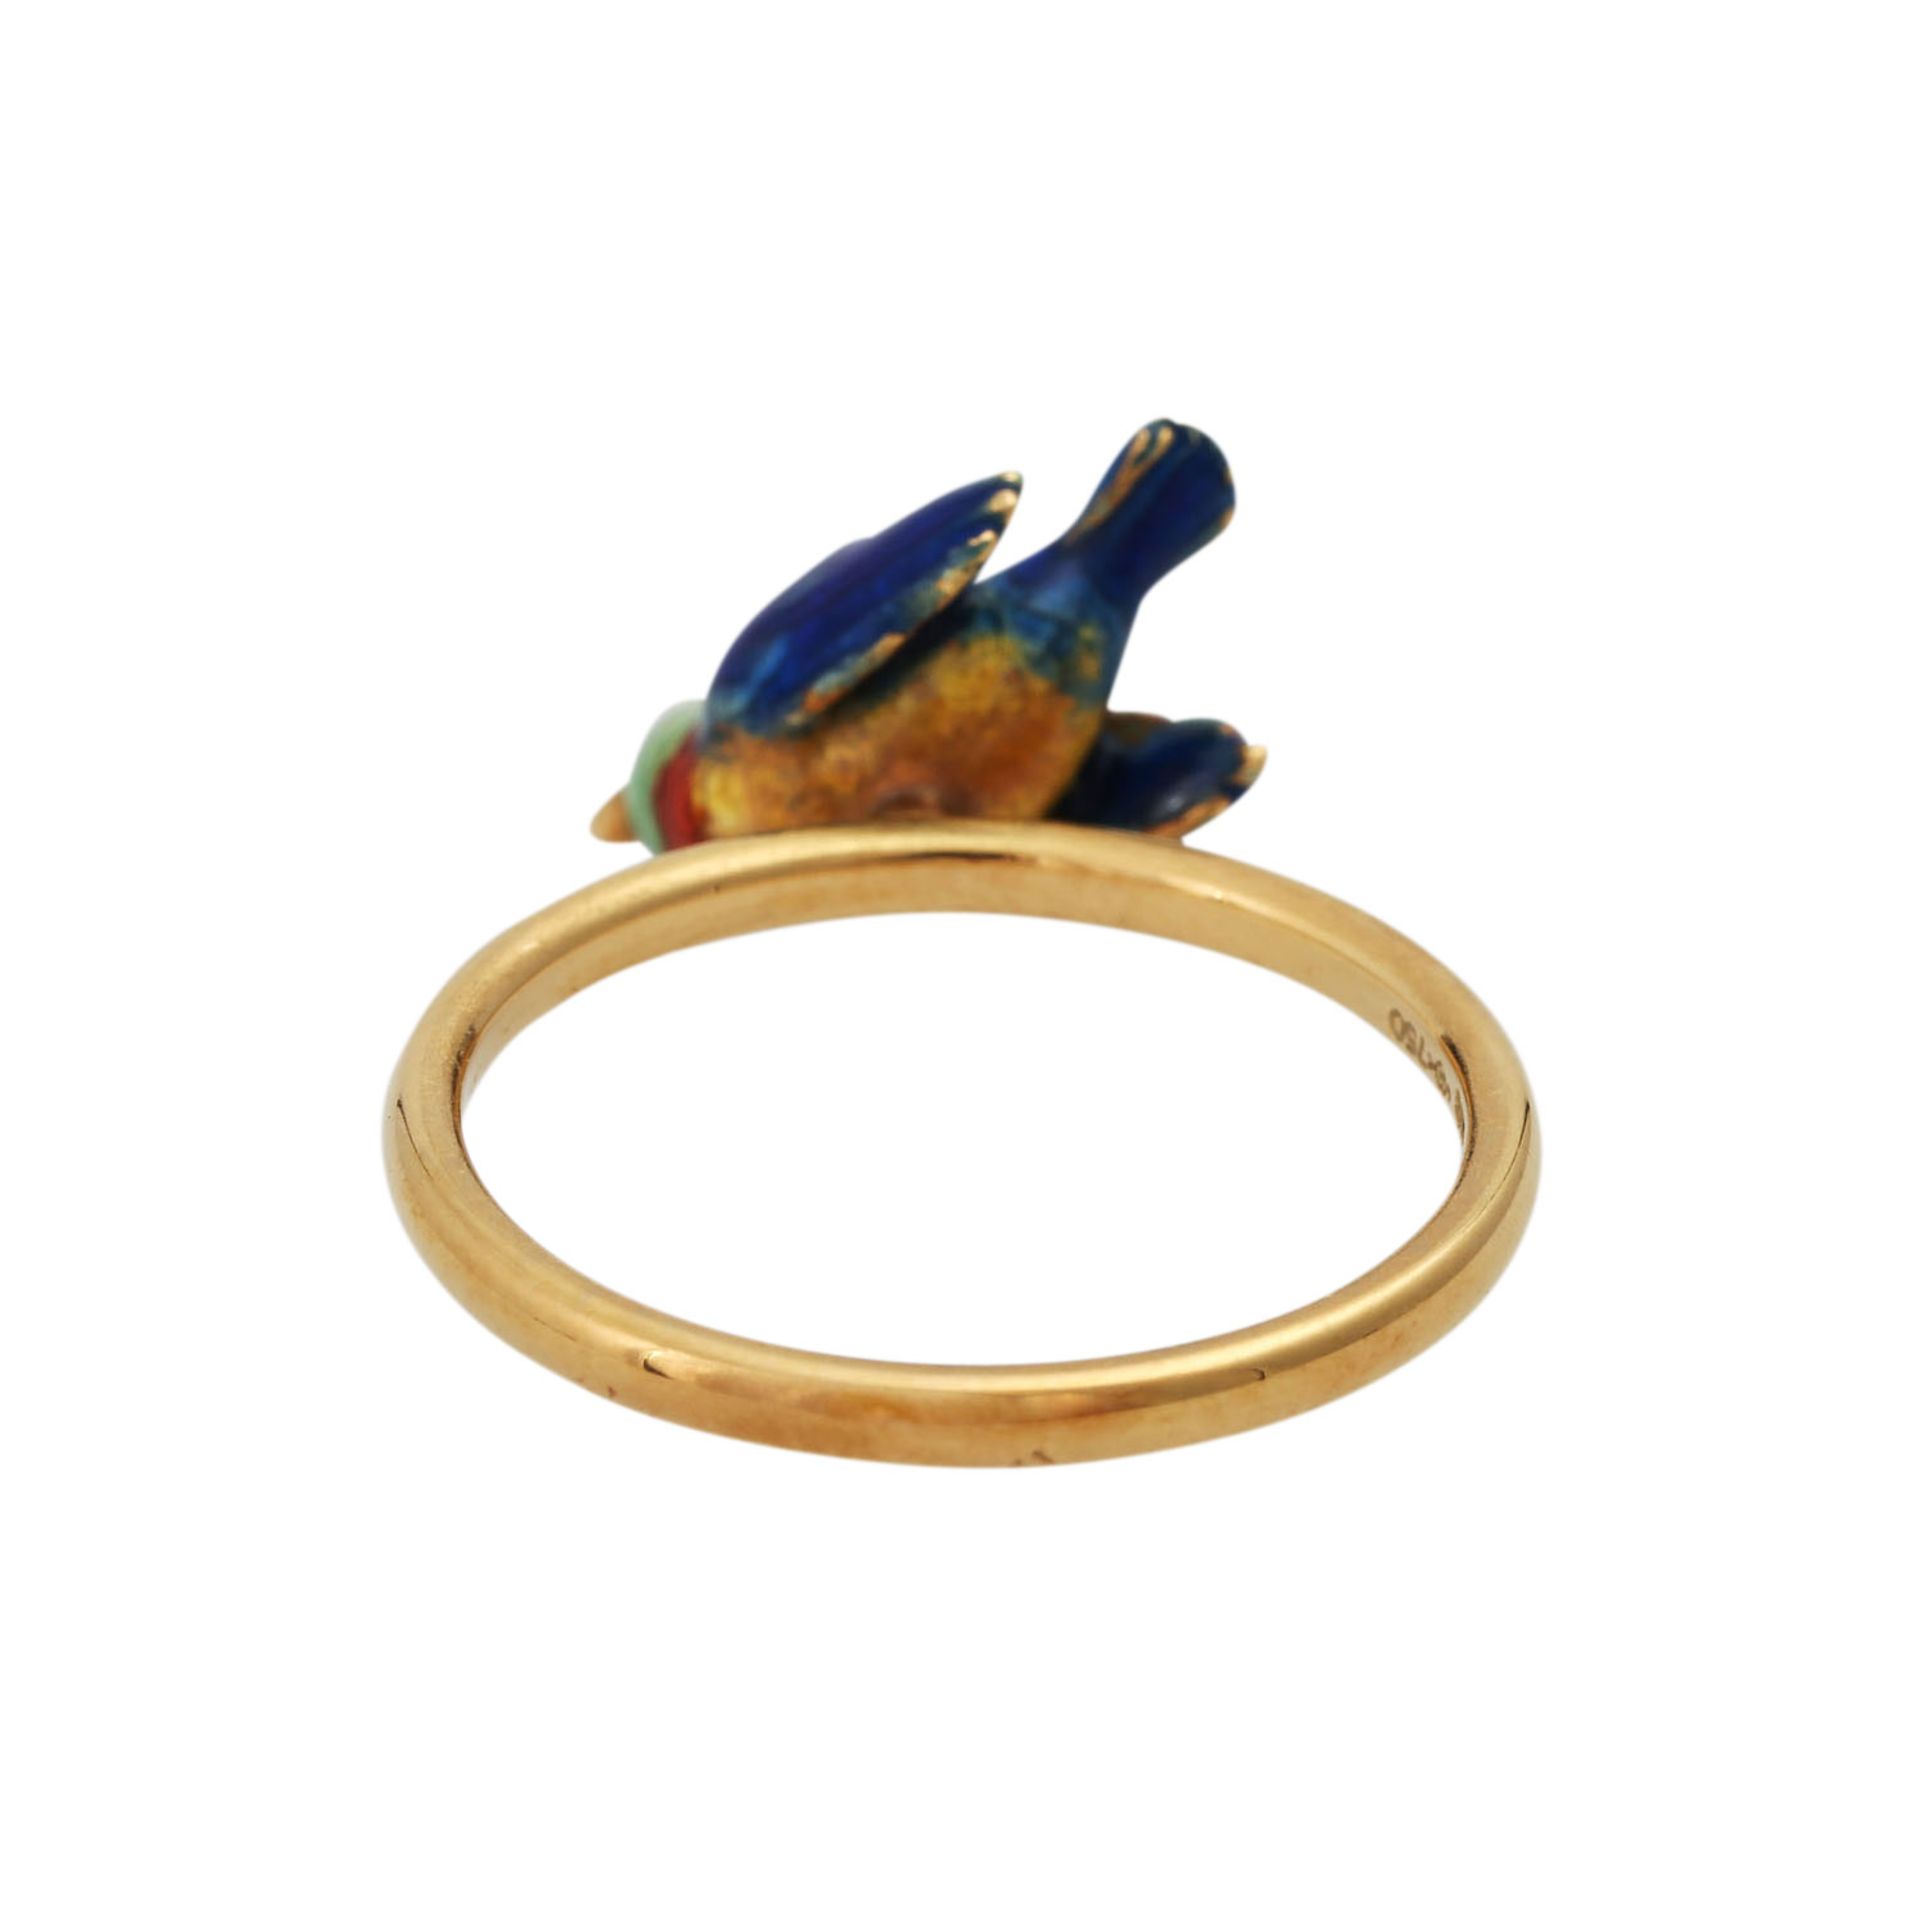 NIESSING Ring "Vogel"in GG 18K, bunt emailliert. RW: ca. 54, Vogel ca. 14x8x8 mm. Ende 20. Jh. - Image 4 of 4